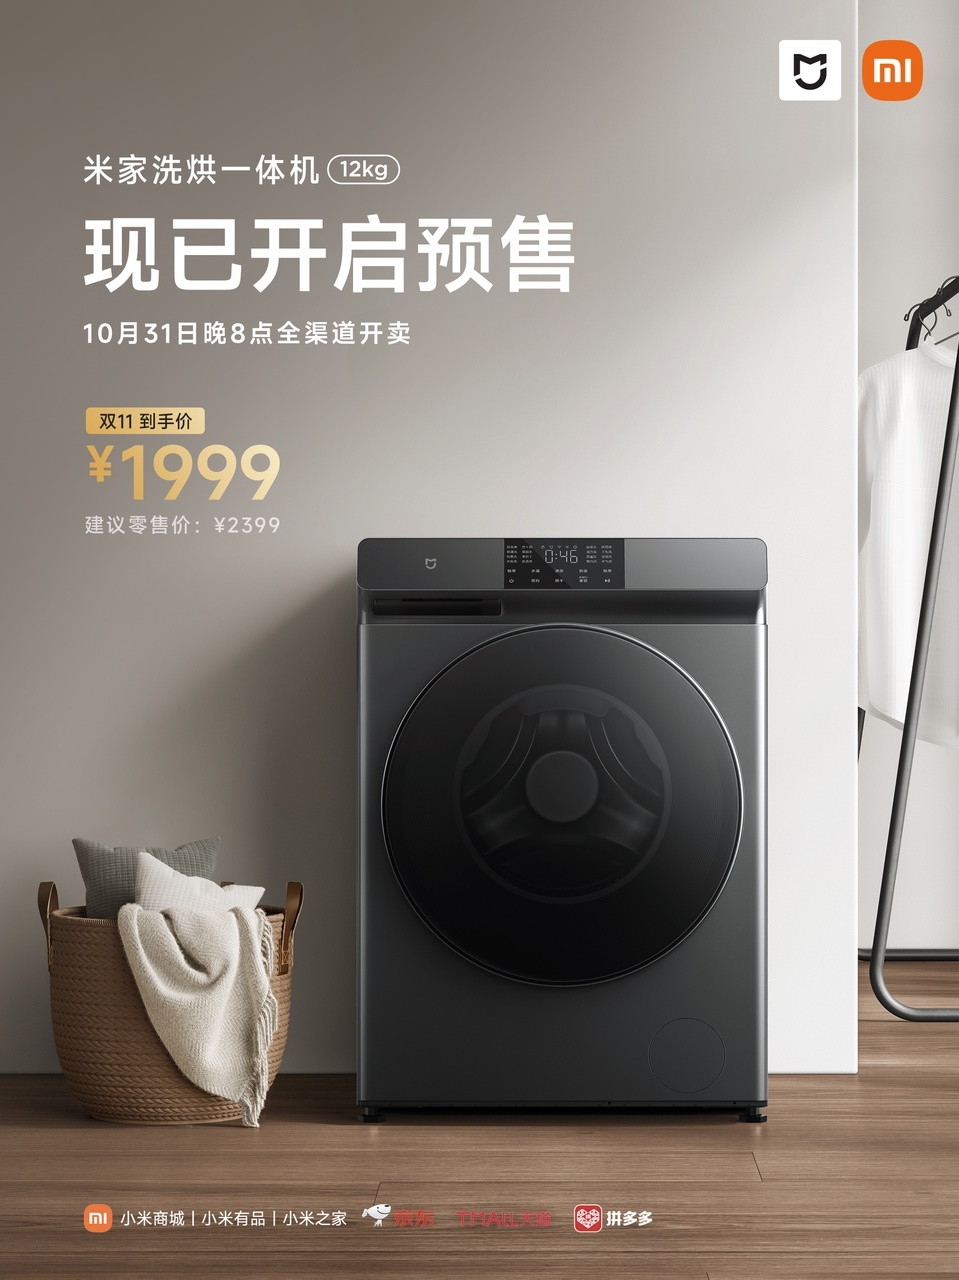 Xiaomi Mijia 12kg Washing And Drying Machine Released Priced At 277 USD